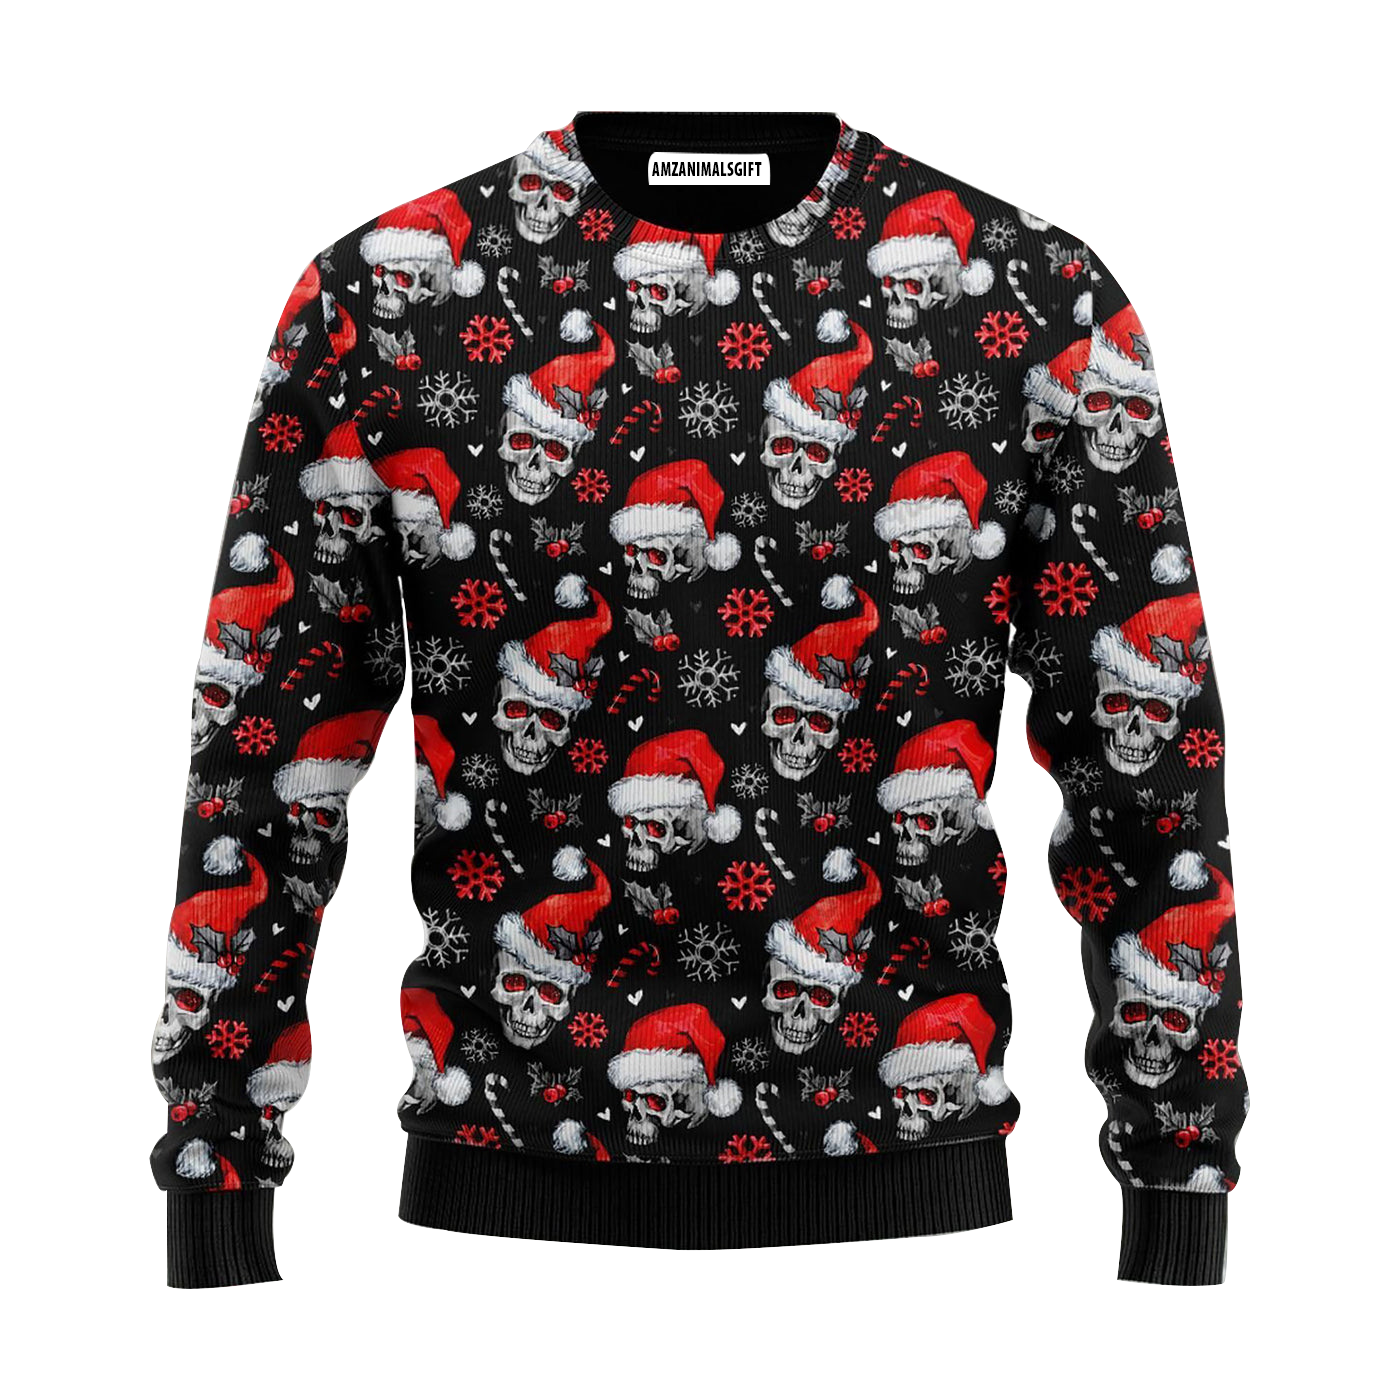 Skull Santa Ugly Christmas Sweater, Perfect Gift and Outfit For Christmas, Halloween, Winter